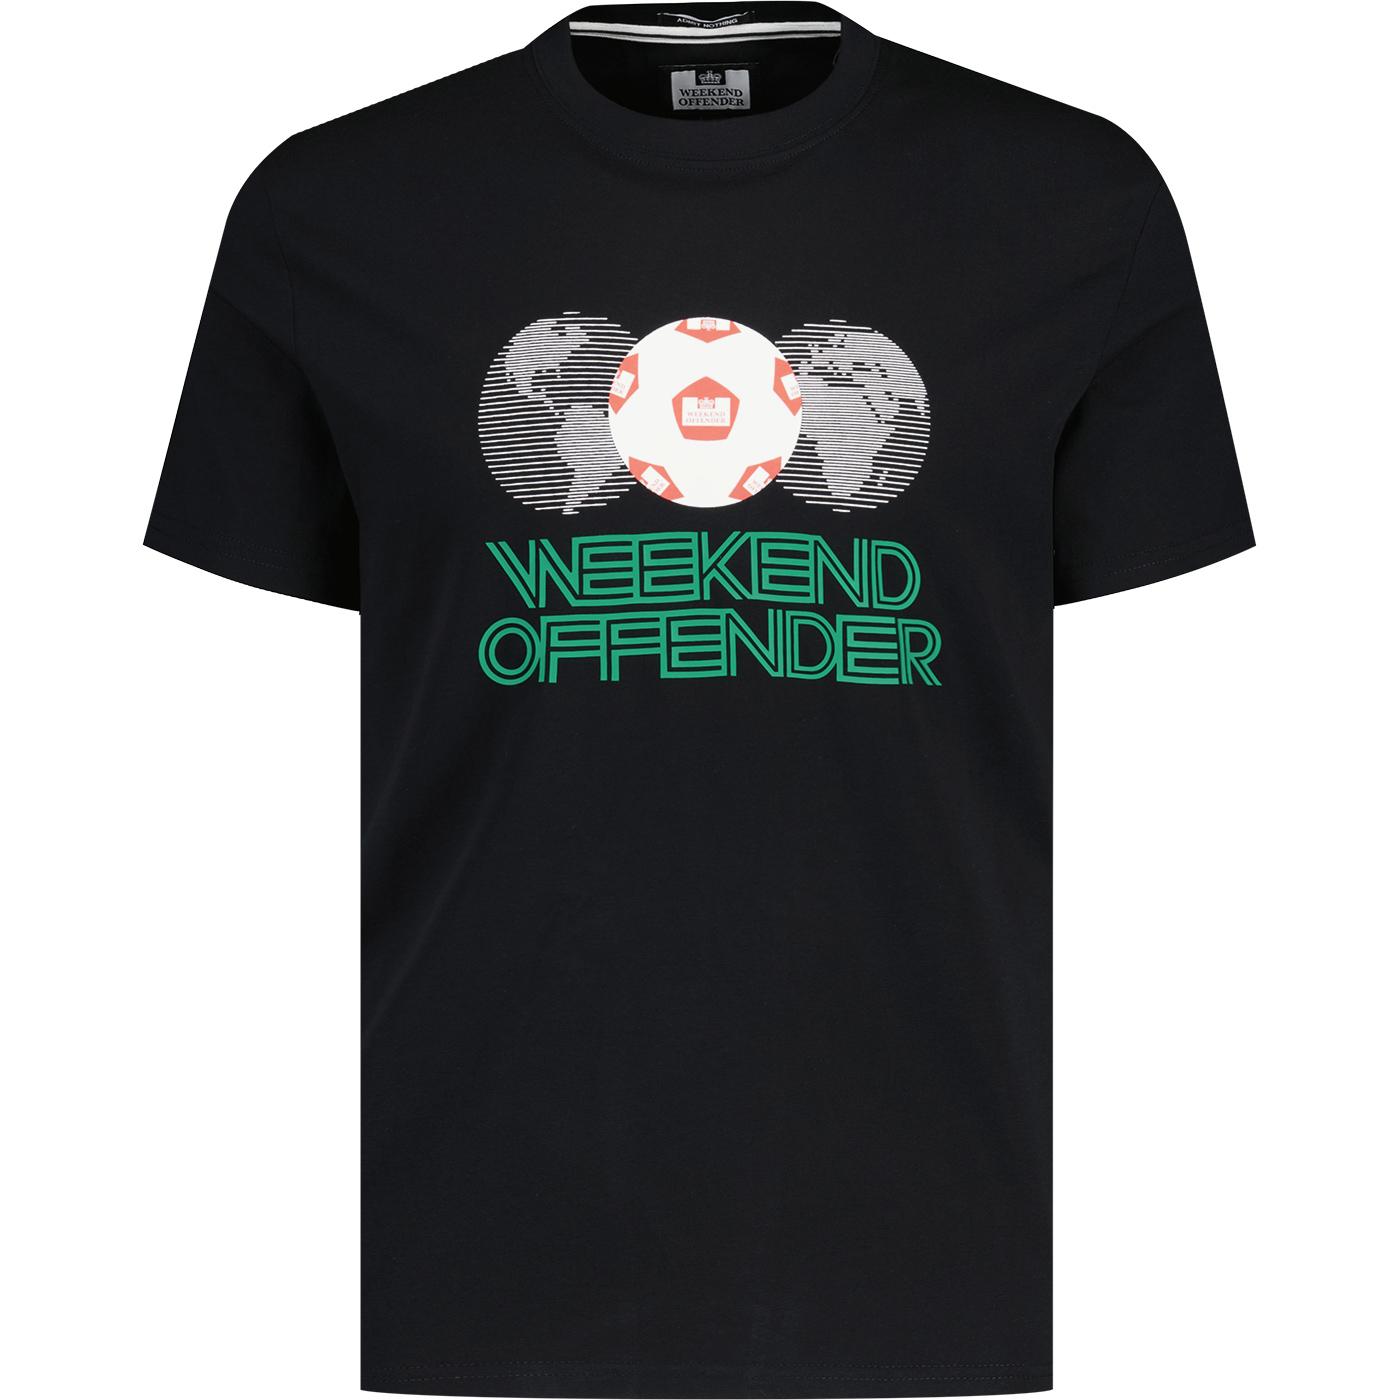 Mexico Weekend Offender World Cup '86 Graphic Tee 